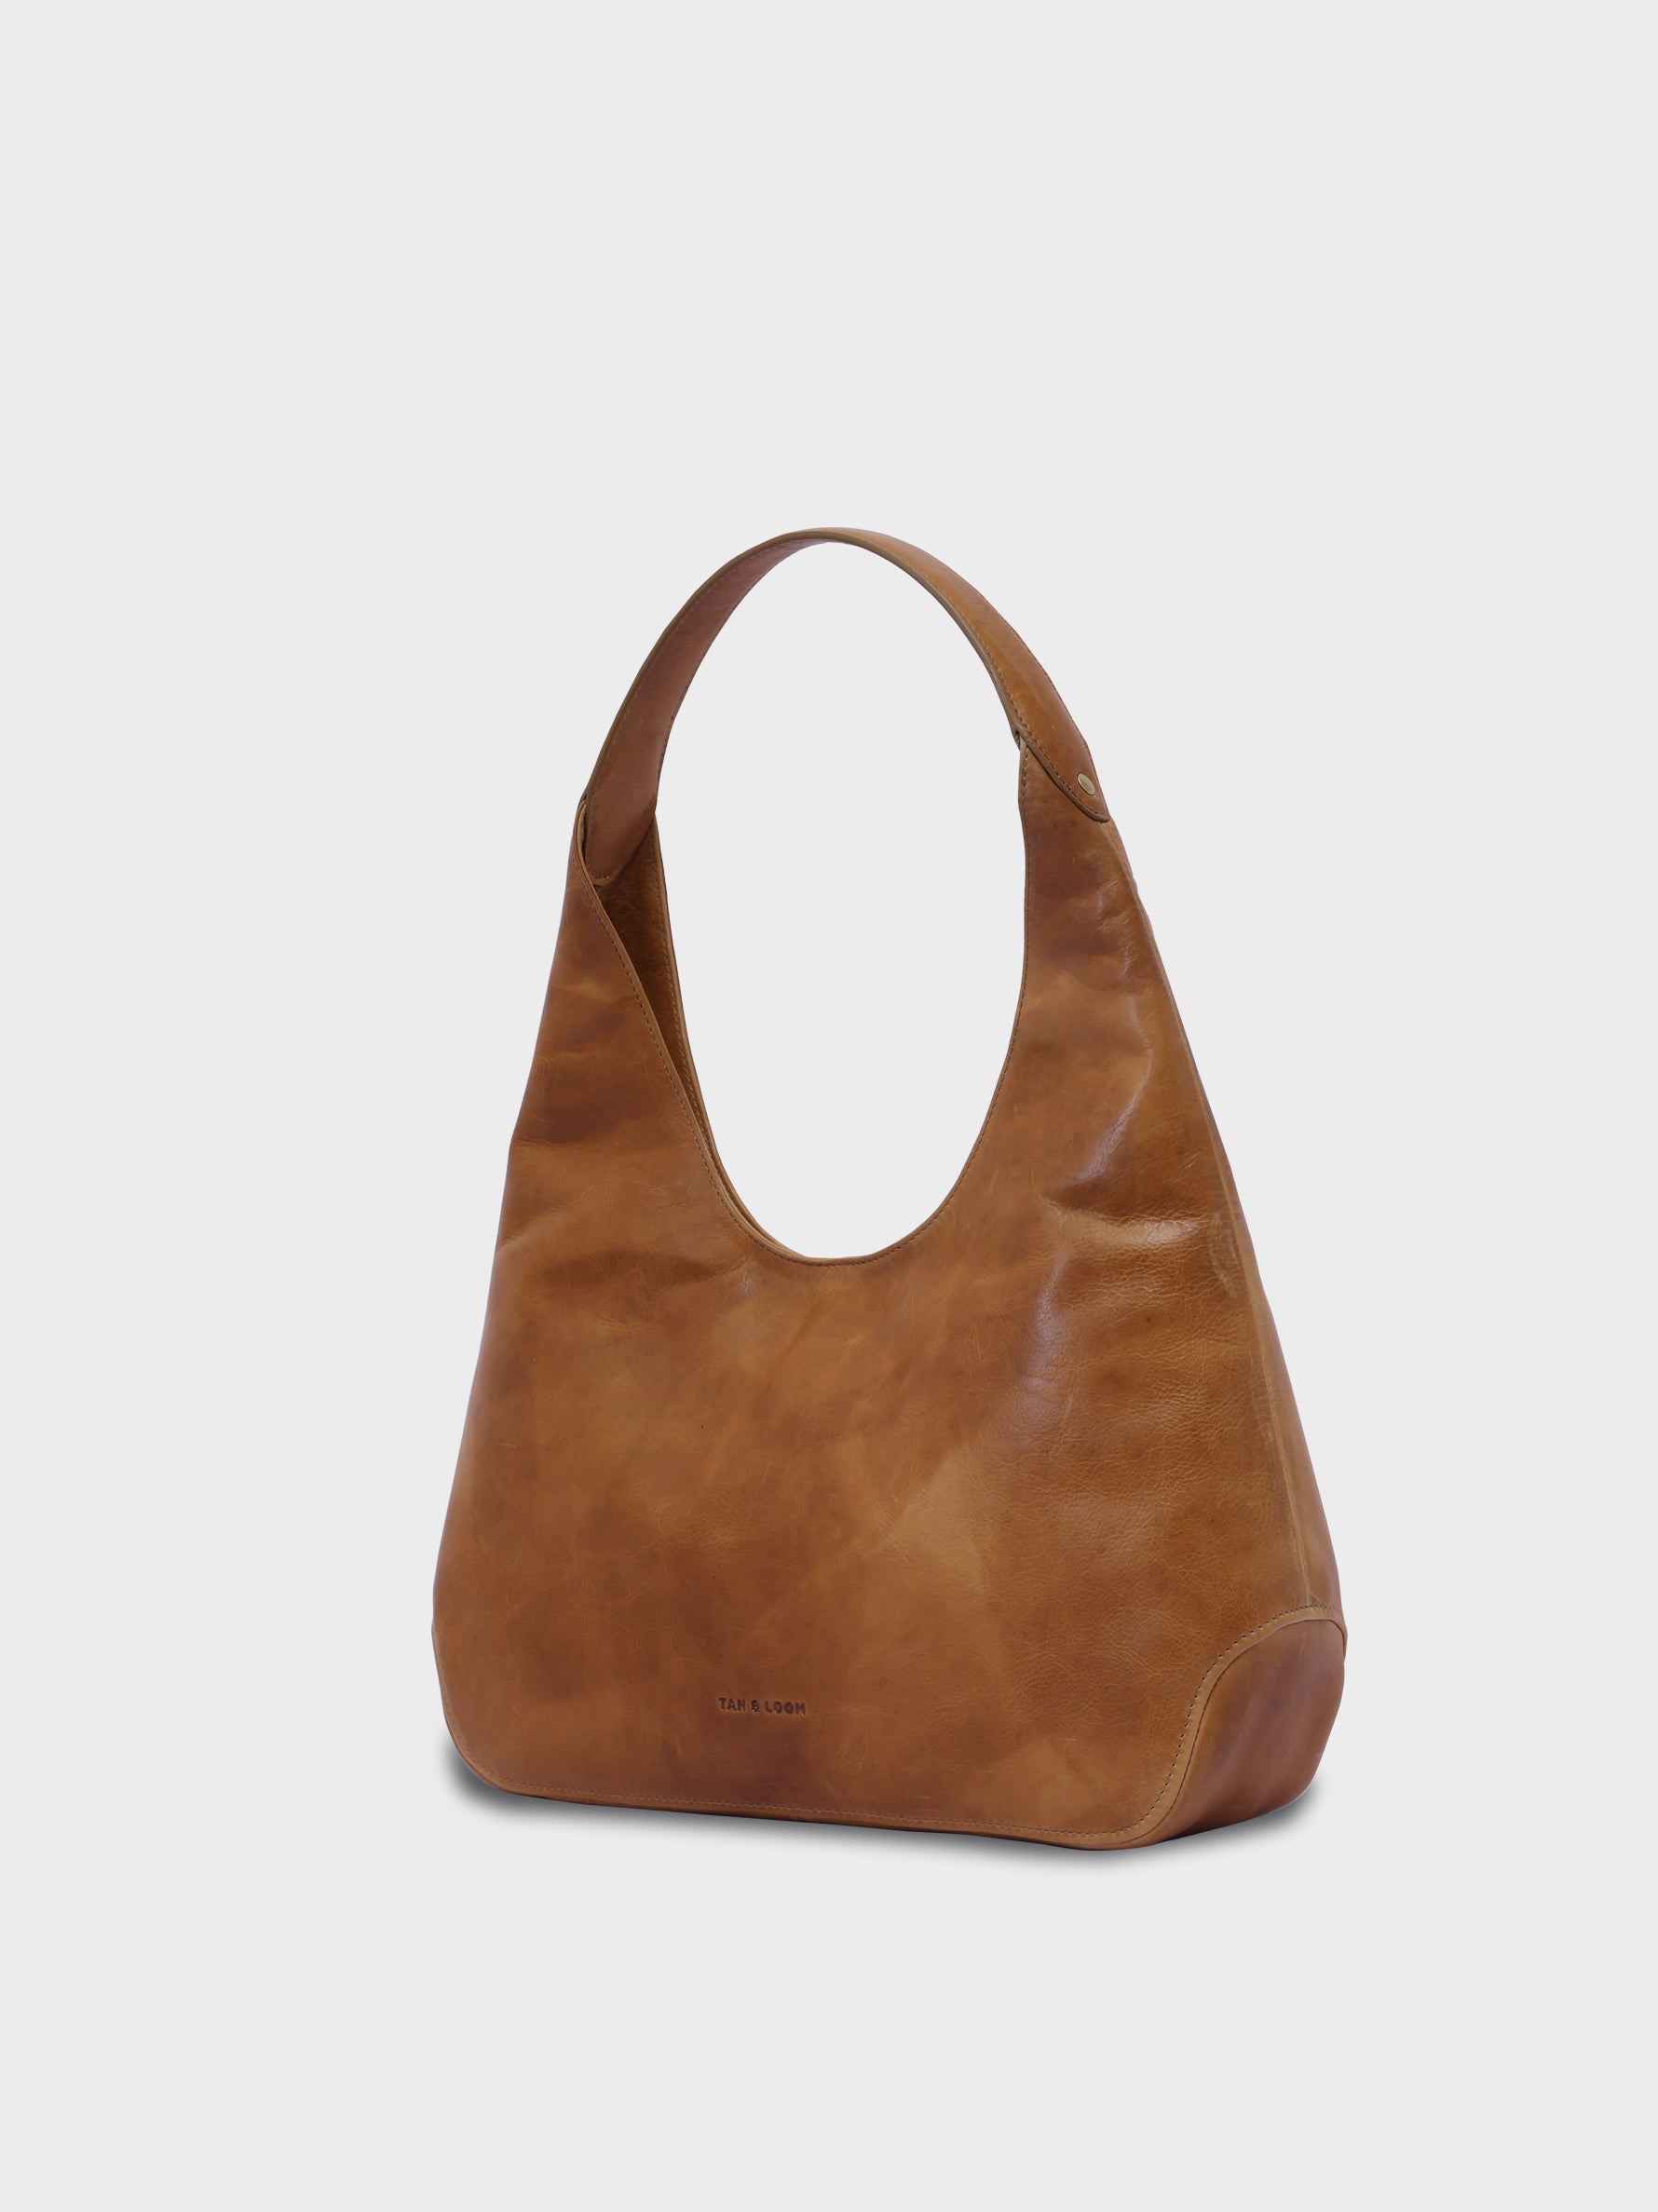 Handcrafted Genuine Vegetable Tanned Leather Hippie's Hobo Tuscany Tan for Women Tan & Loom